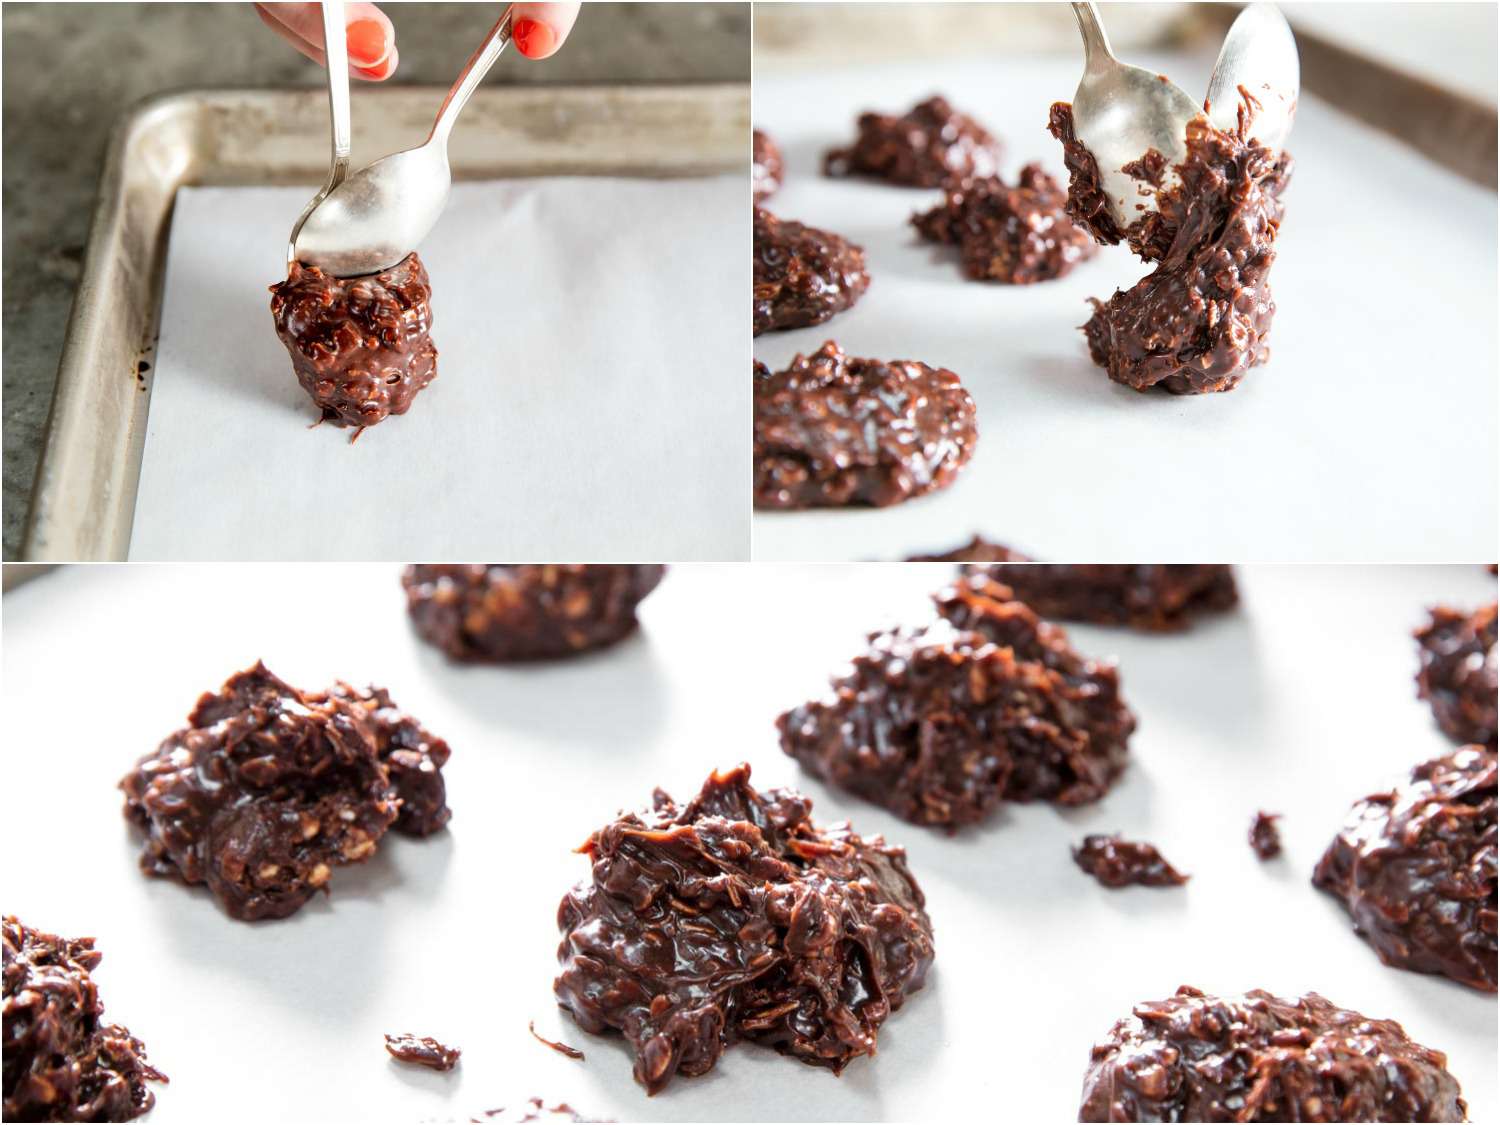 A collage of the no-bake cookie mixture being scooped and placed on a parchment-lined baking sheet.